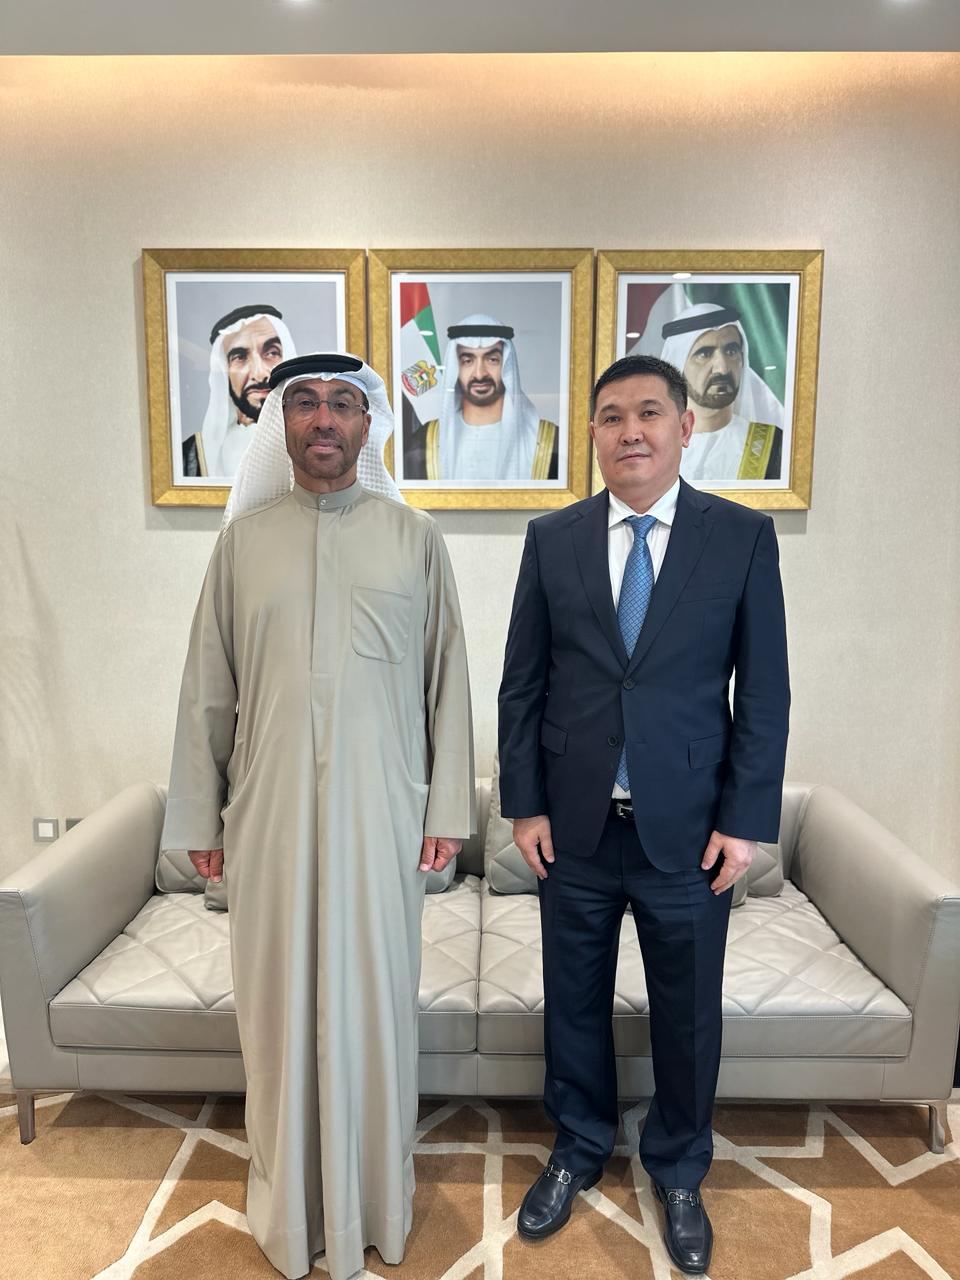 The UAE are interested in deepening cooperation with Kazakhstan